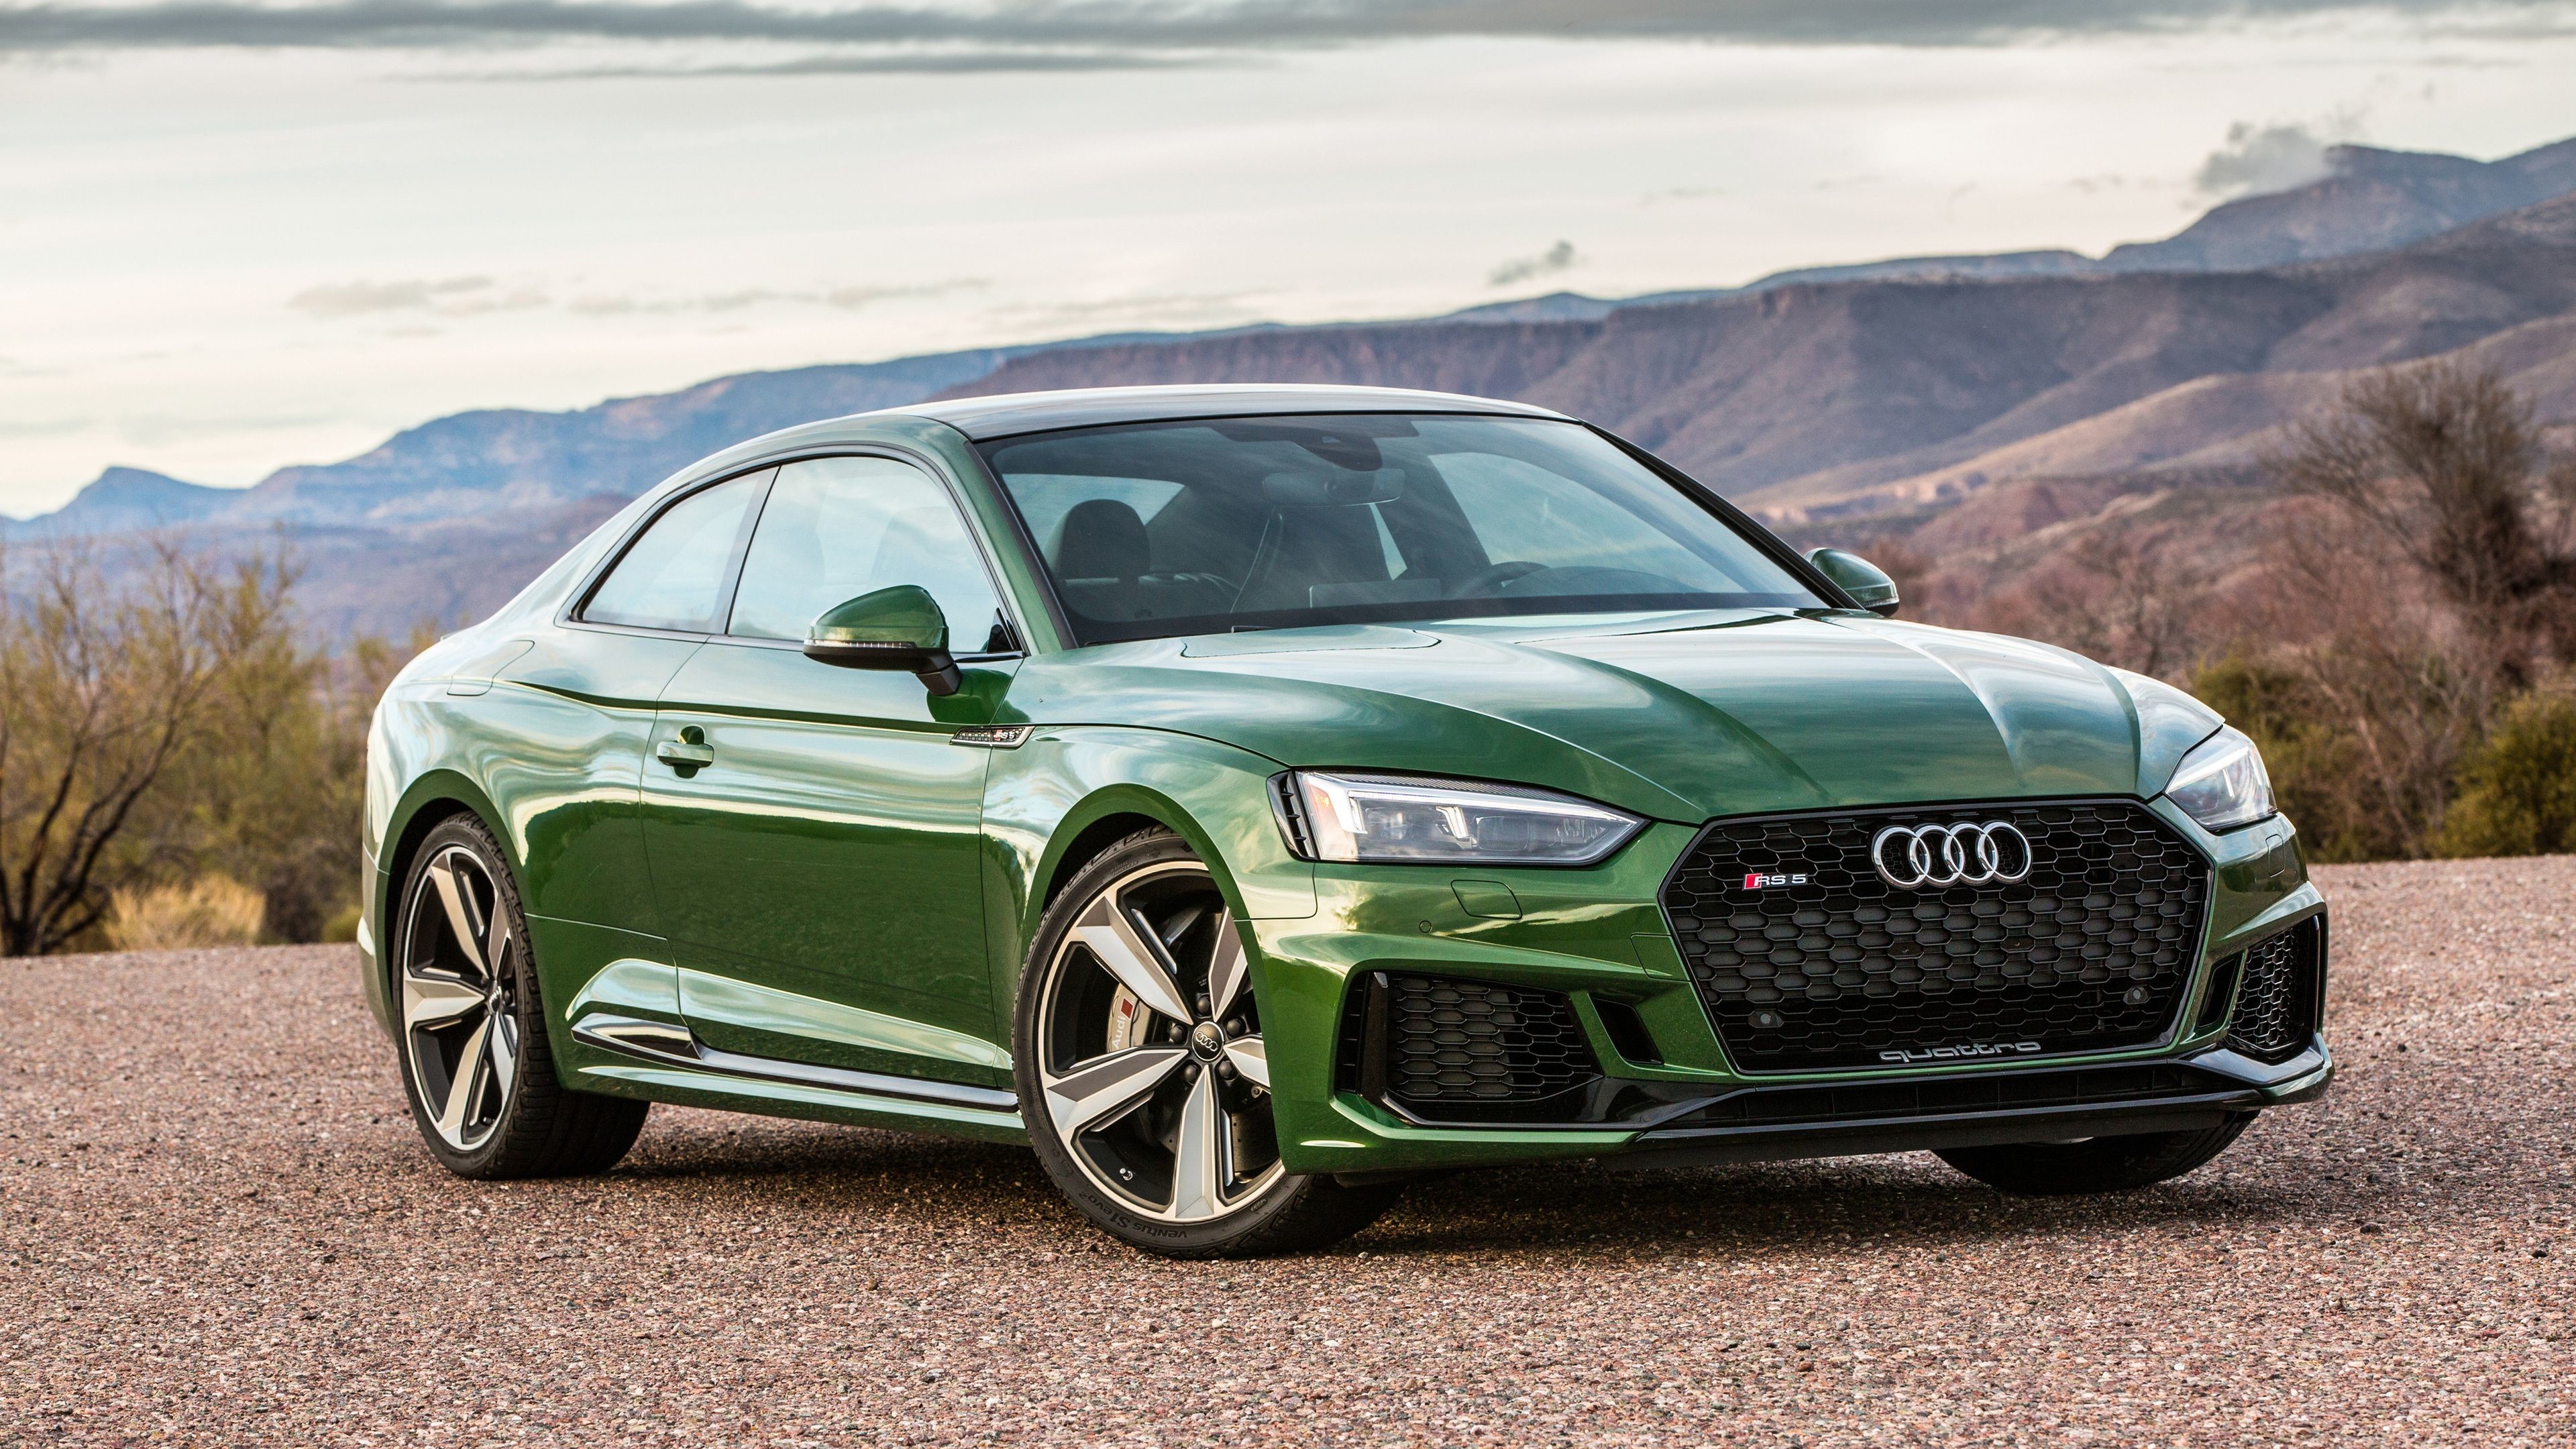 3840x2160, 2018 Audi Rs 5 Coupe Hd Wallpapers, Cars - Audi Car With Logo - HD Wallpaper 